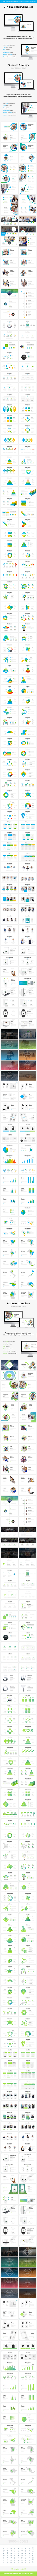 Complete Business - 2 In 1 PowerPoint Template Bundle